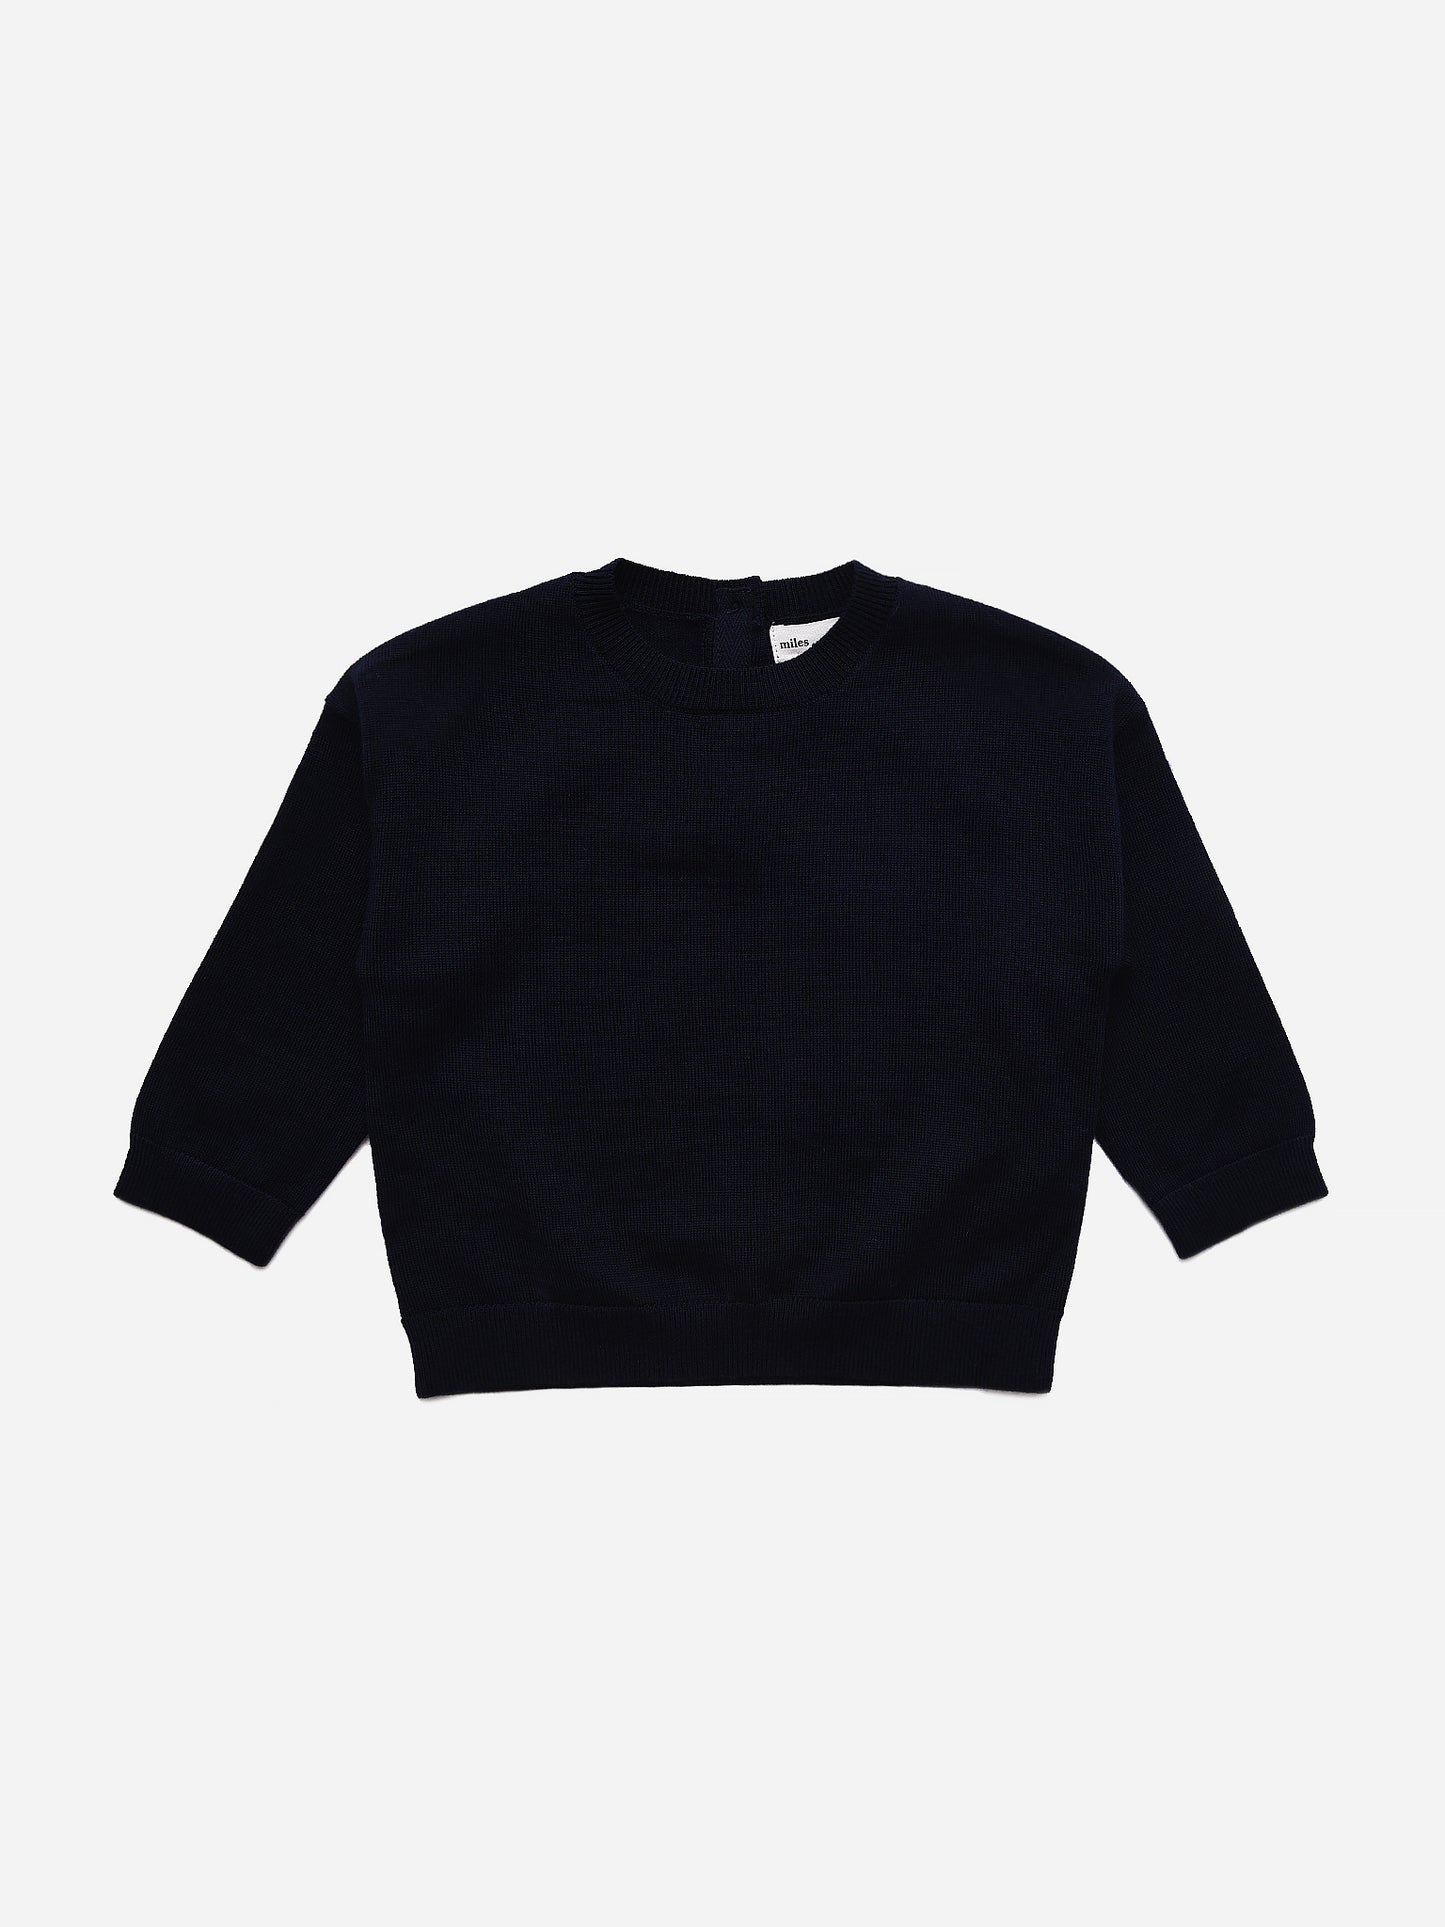 Miles Baby Knit Sweater